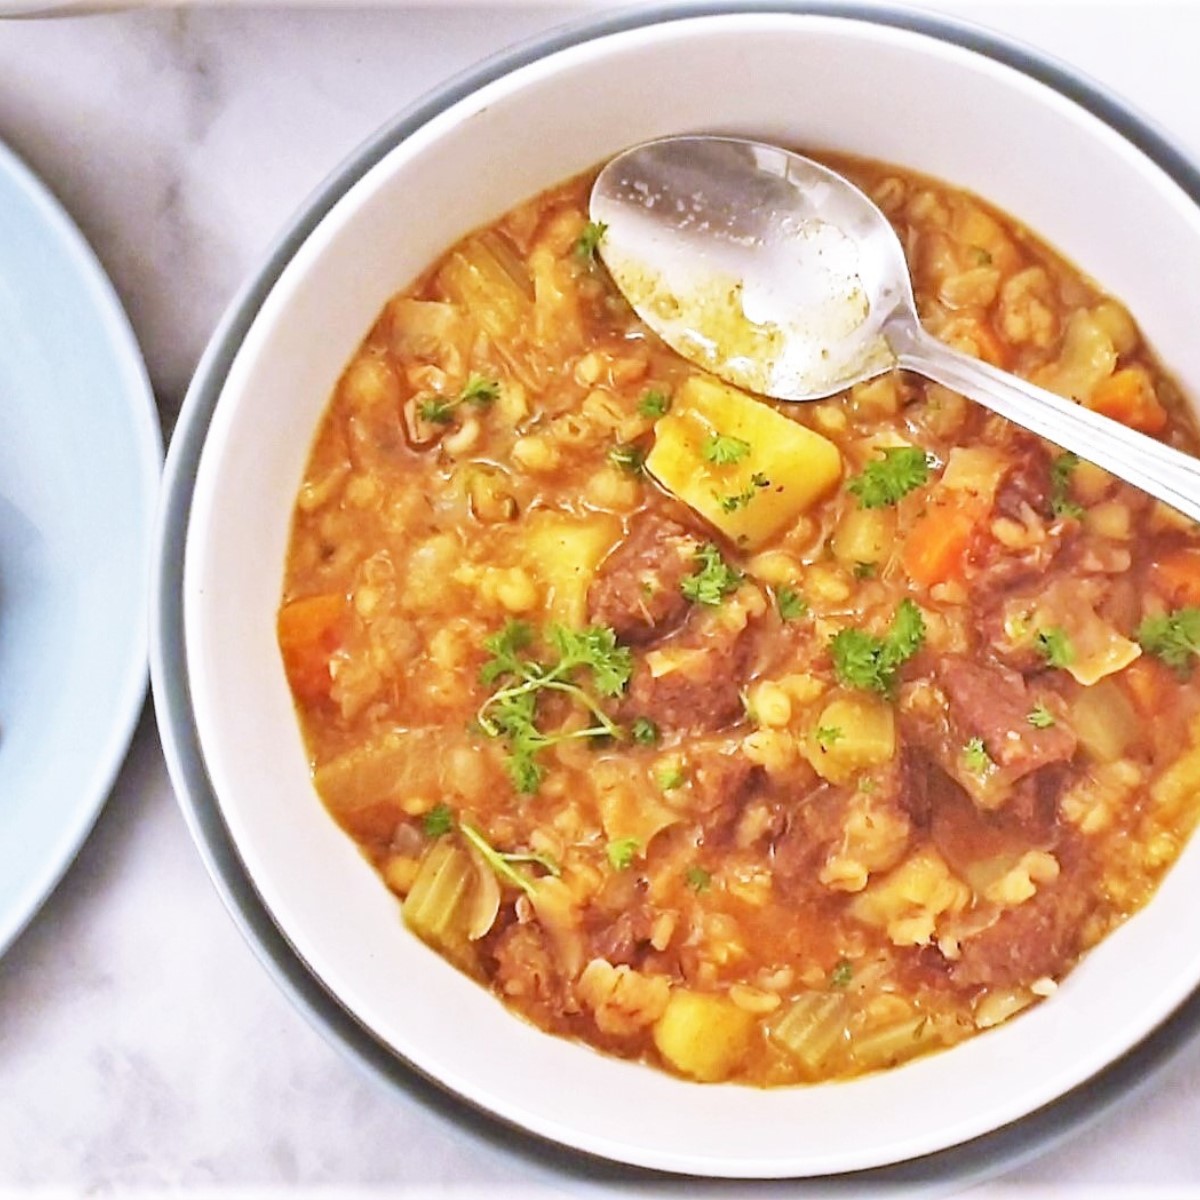 A bowl of beef and barley stew with a spoon.